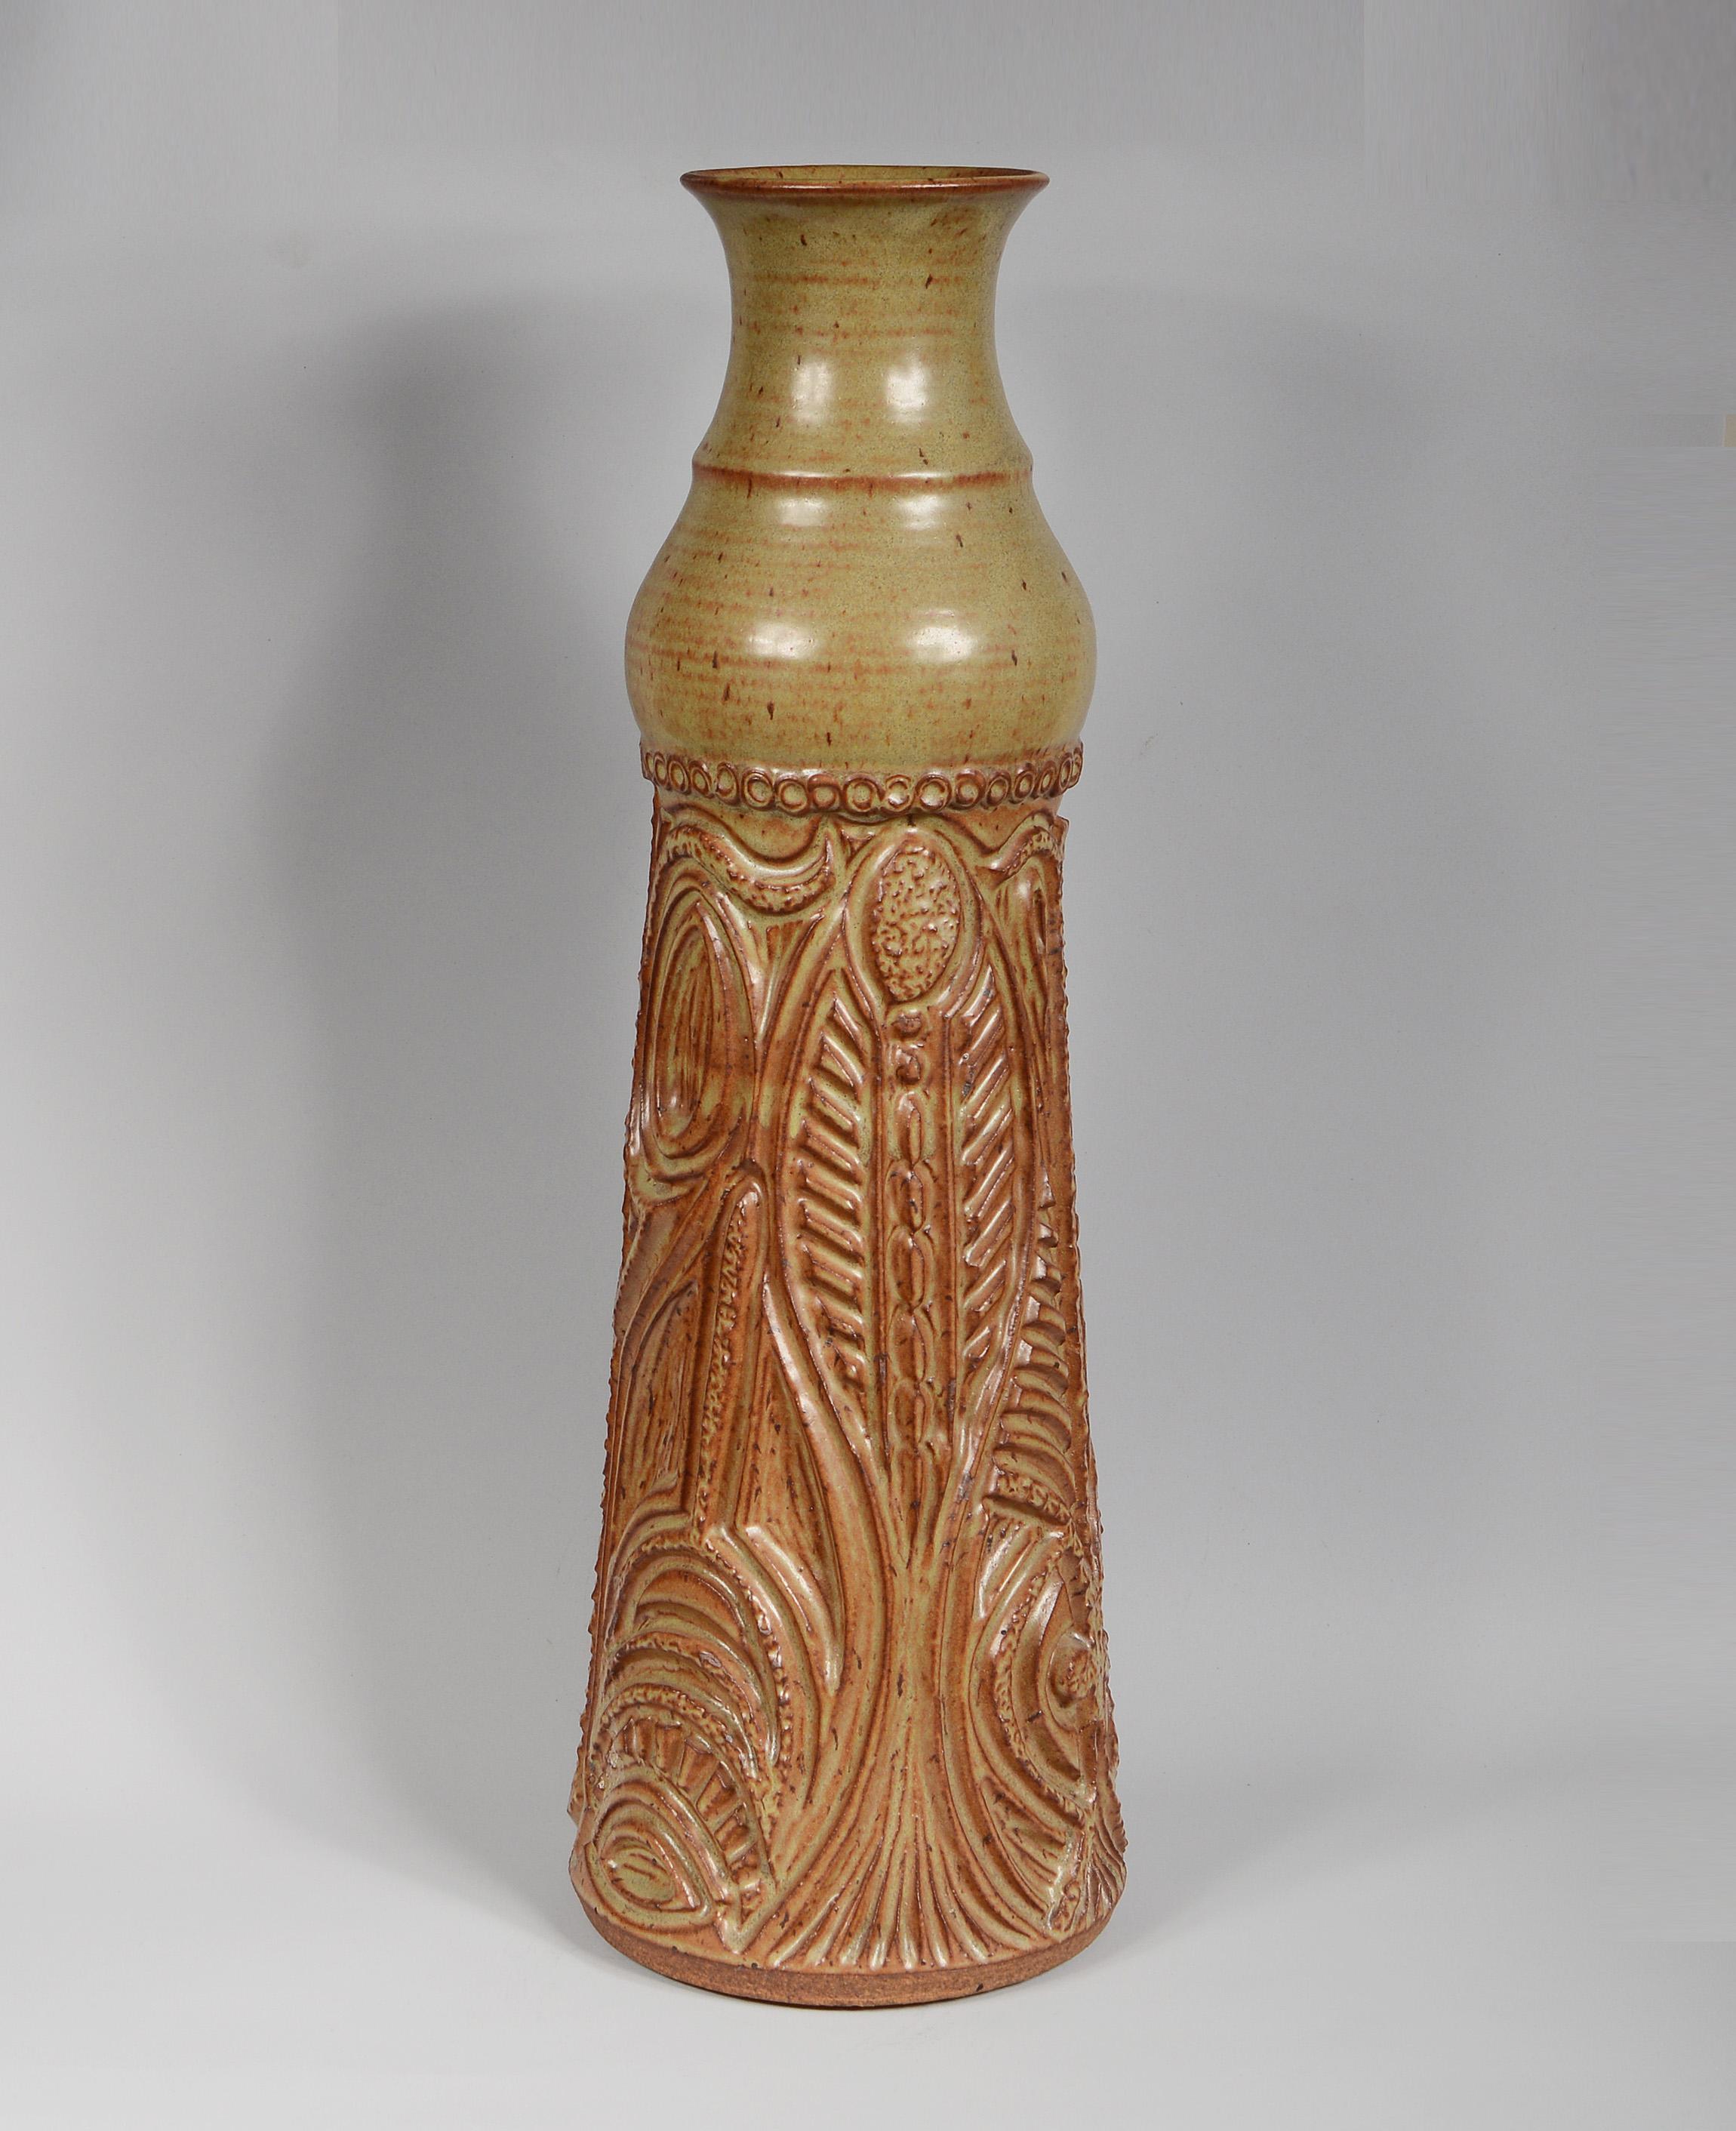 Tall pottery vase by Northern California potters Bill and June Vaughn. The vase is intricately and deeply carved. June would do the carving and Bill the throwing.